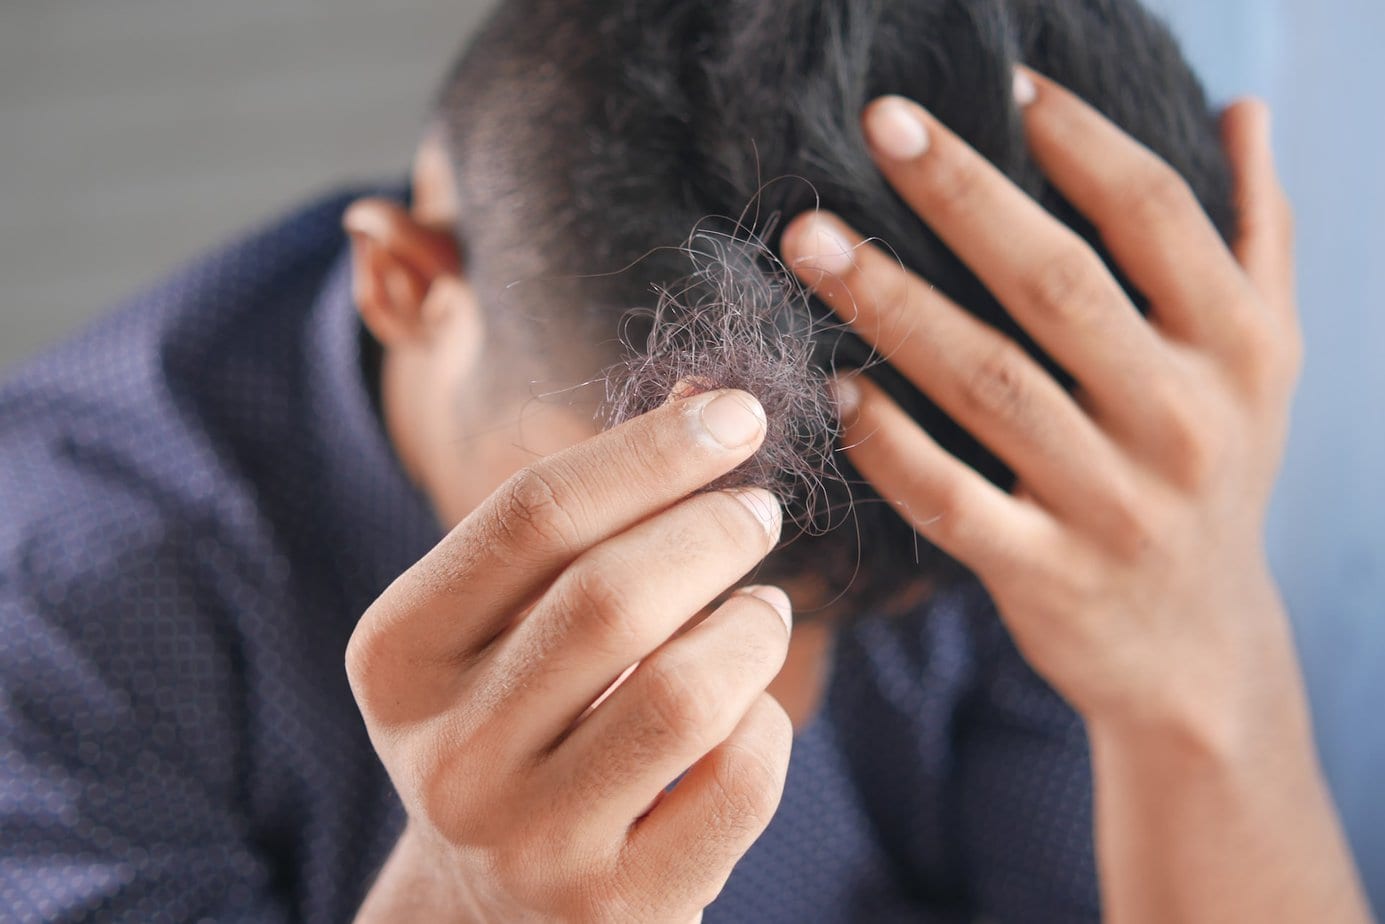 Alopecia areata – what is this condition?